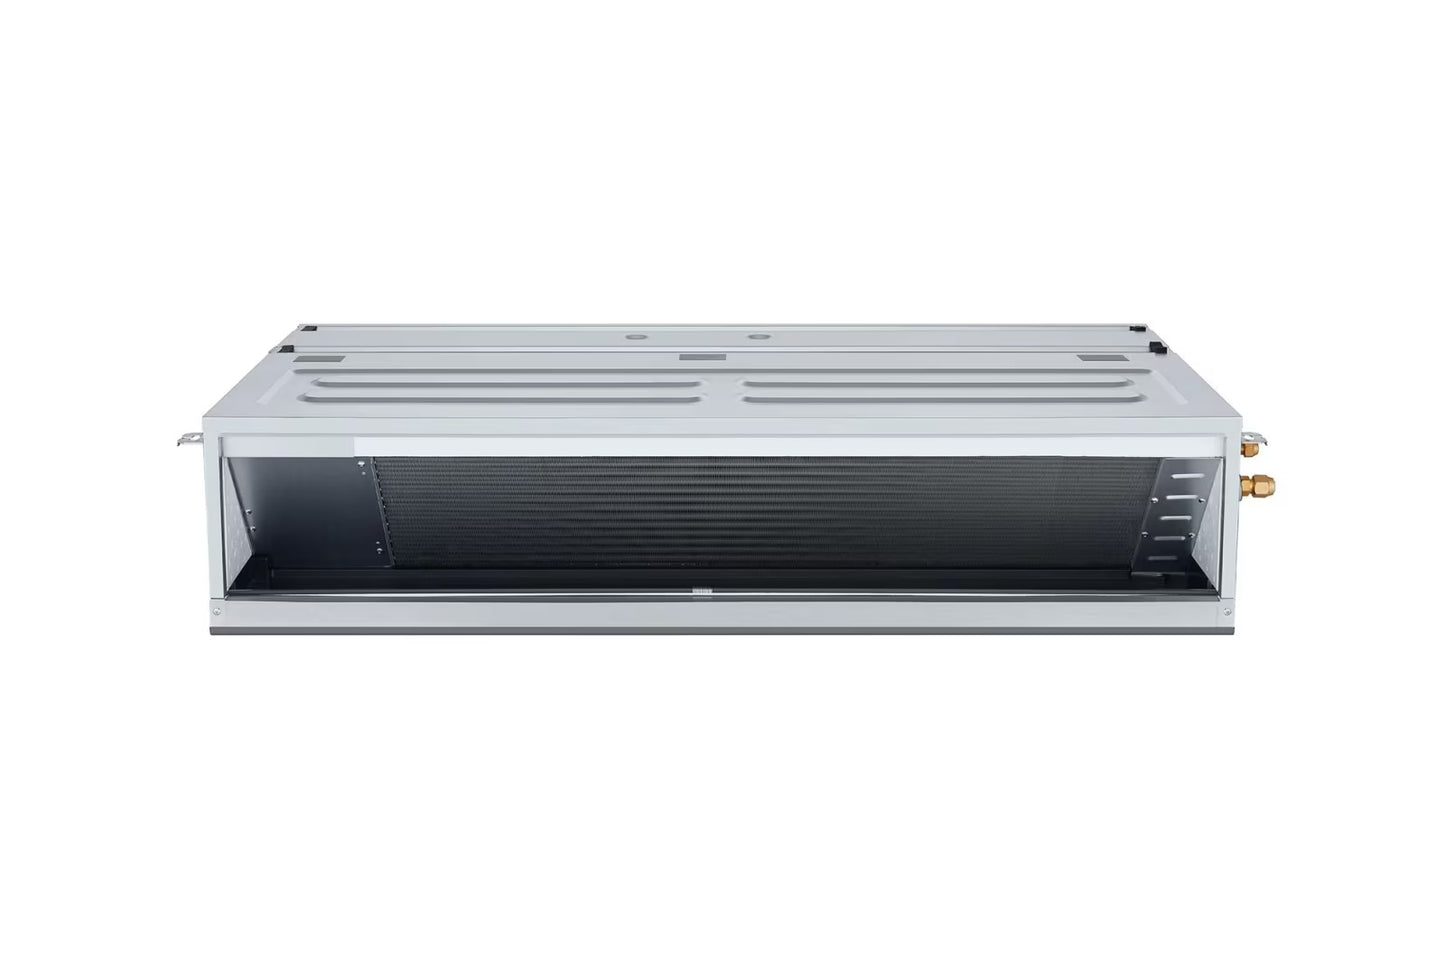 LG Ceiling Concealed Duct INV Unit 5.6KW with Mid Static and E.S.P. Control for Multiple Rooms - ARNU18GM1A4